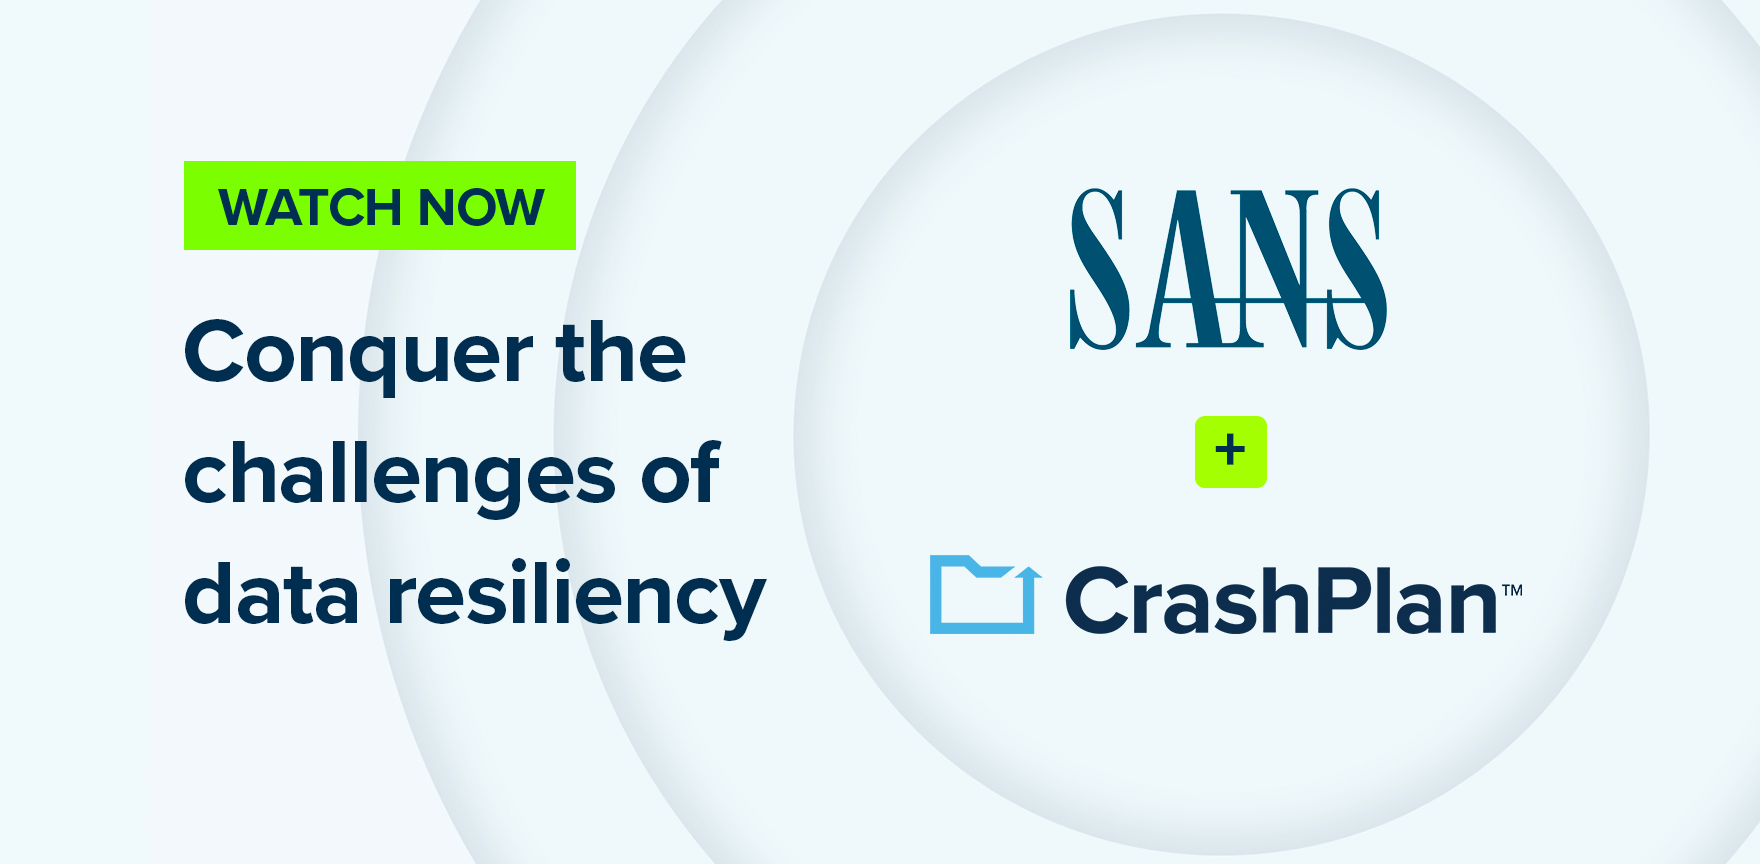 Cover for video about SANS and CrashPlan with text reading "Conquer the challenges of data resiliency."